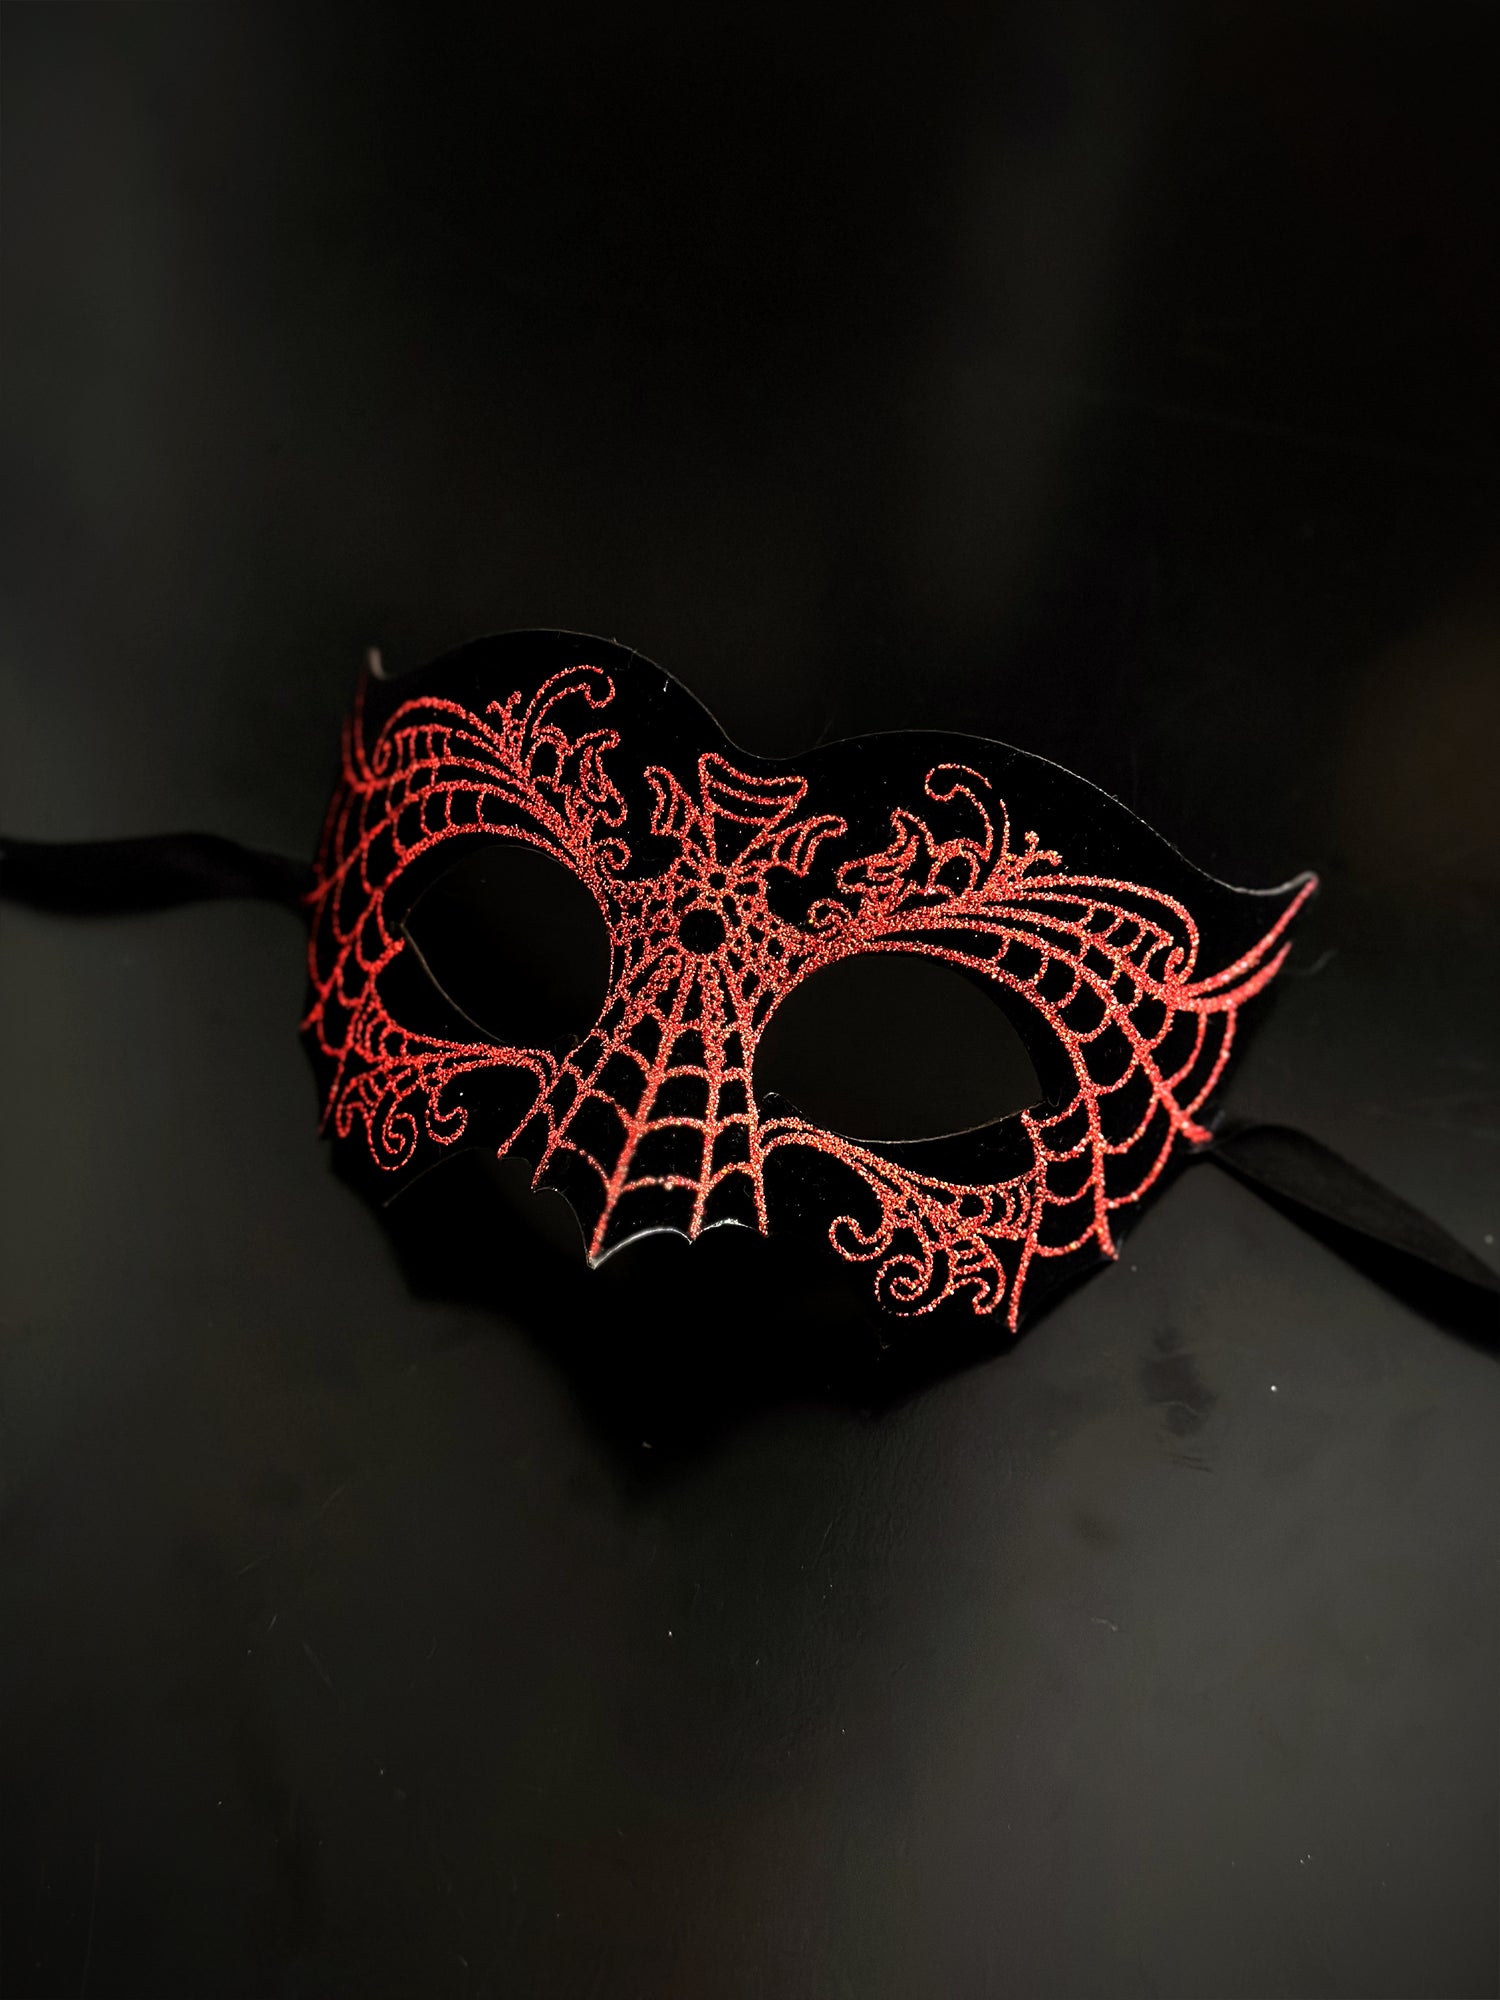 Unisex masquerade mask in black and red.